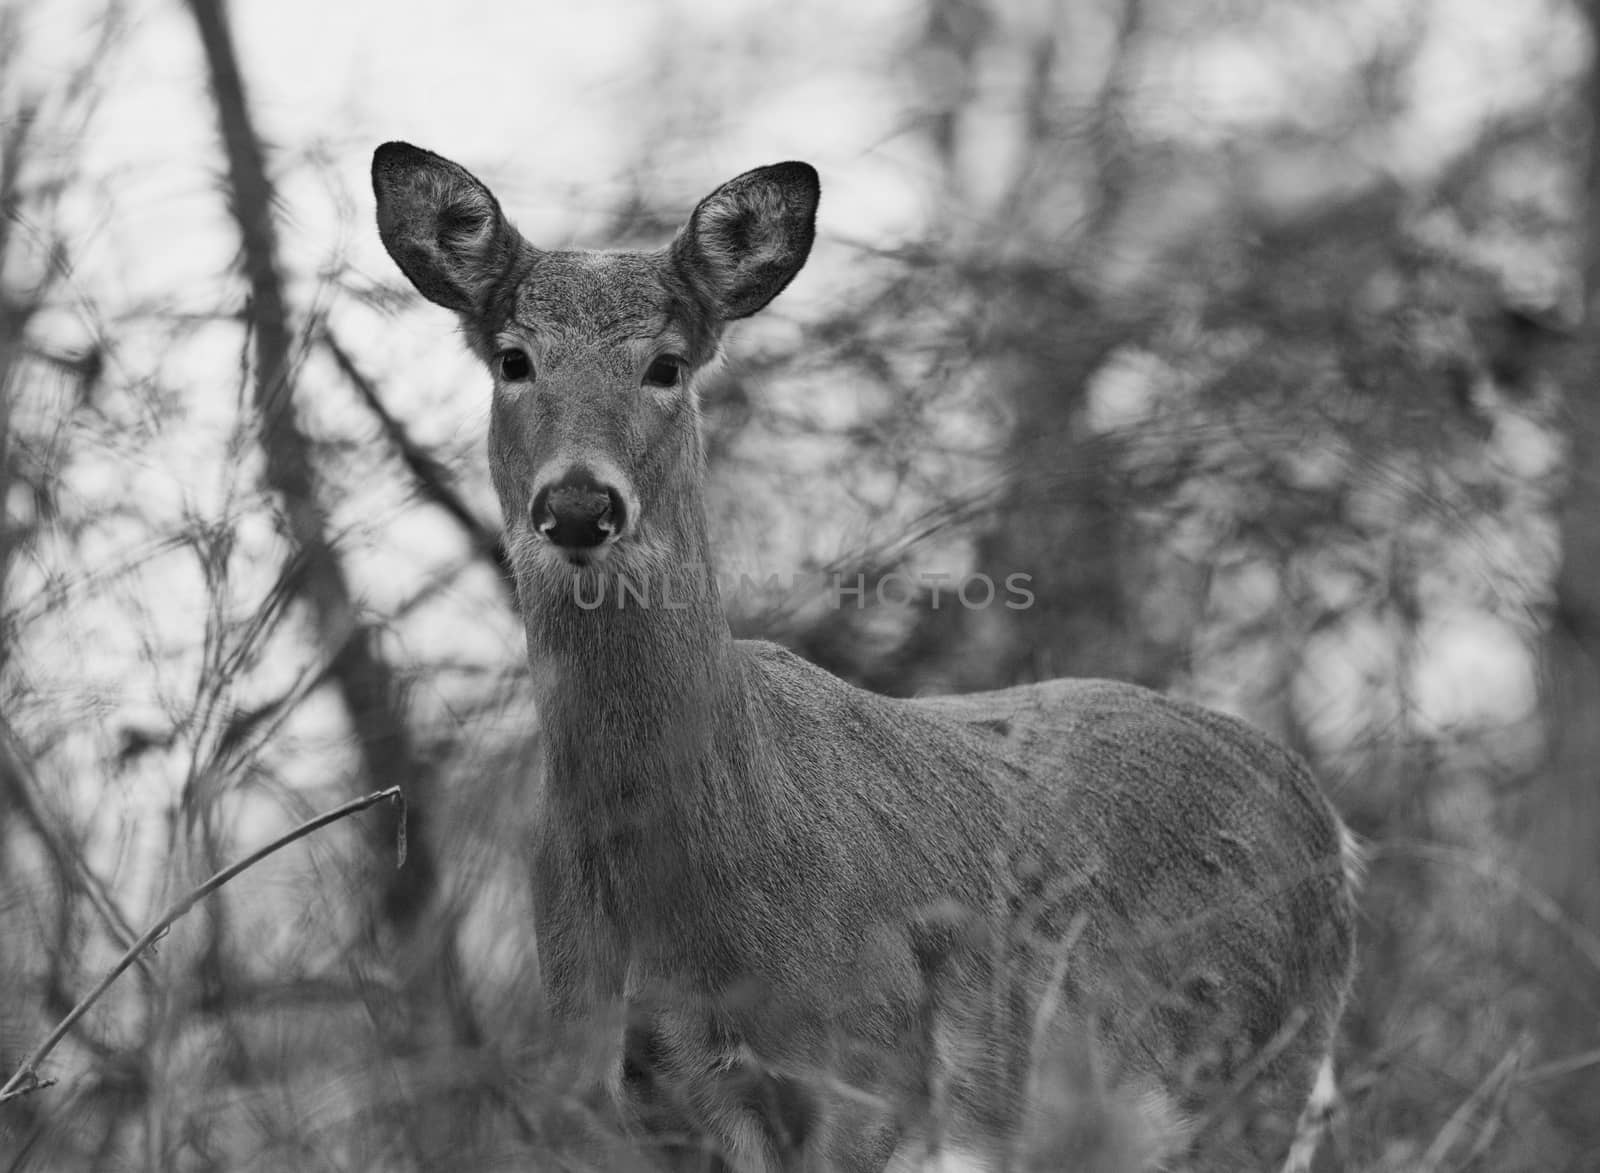 Beautiful black and white photo of the wild deer by teo